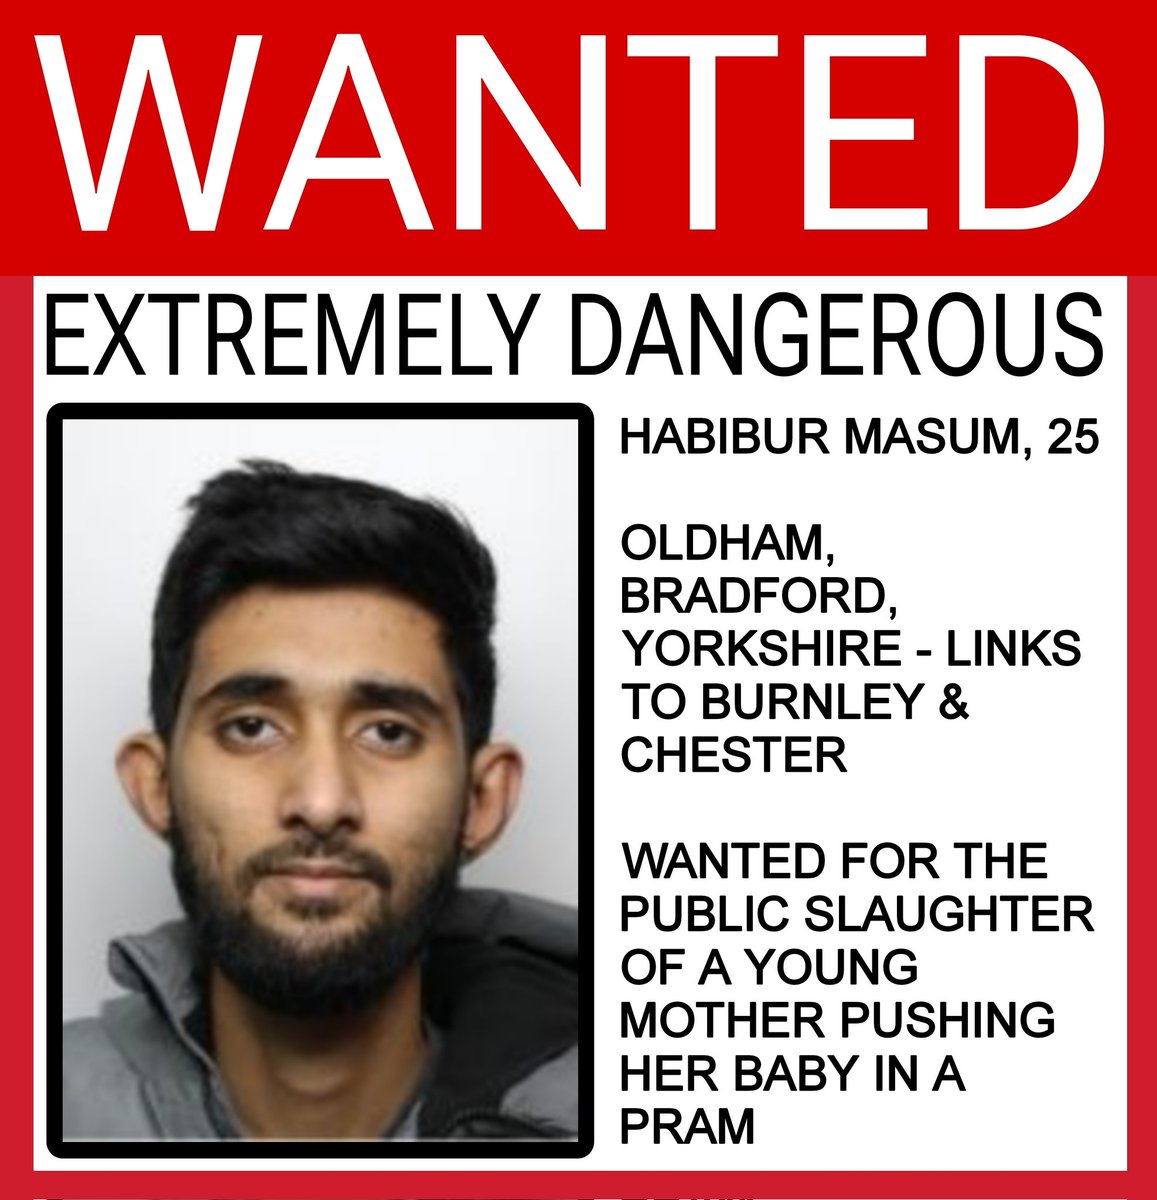 Wanted for the slaughter of a young mom. He stabbed her in the neck 4-5 times whilst she was pushing her baby in a pram & left her to bleed out on the street. Women aren't safe with these savages on the streets. SHARE THIS ANIMALS FACE EVERYWHERE! #Bradford #Westgate #Yorkshire